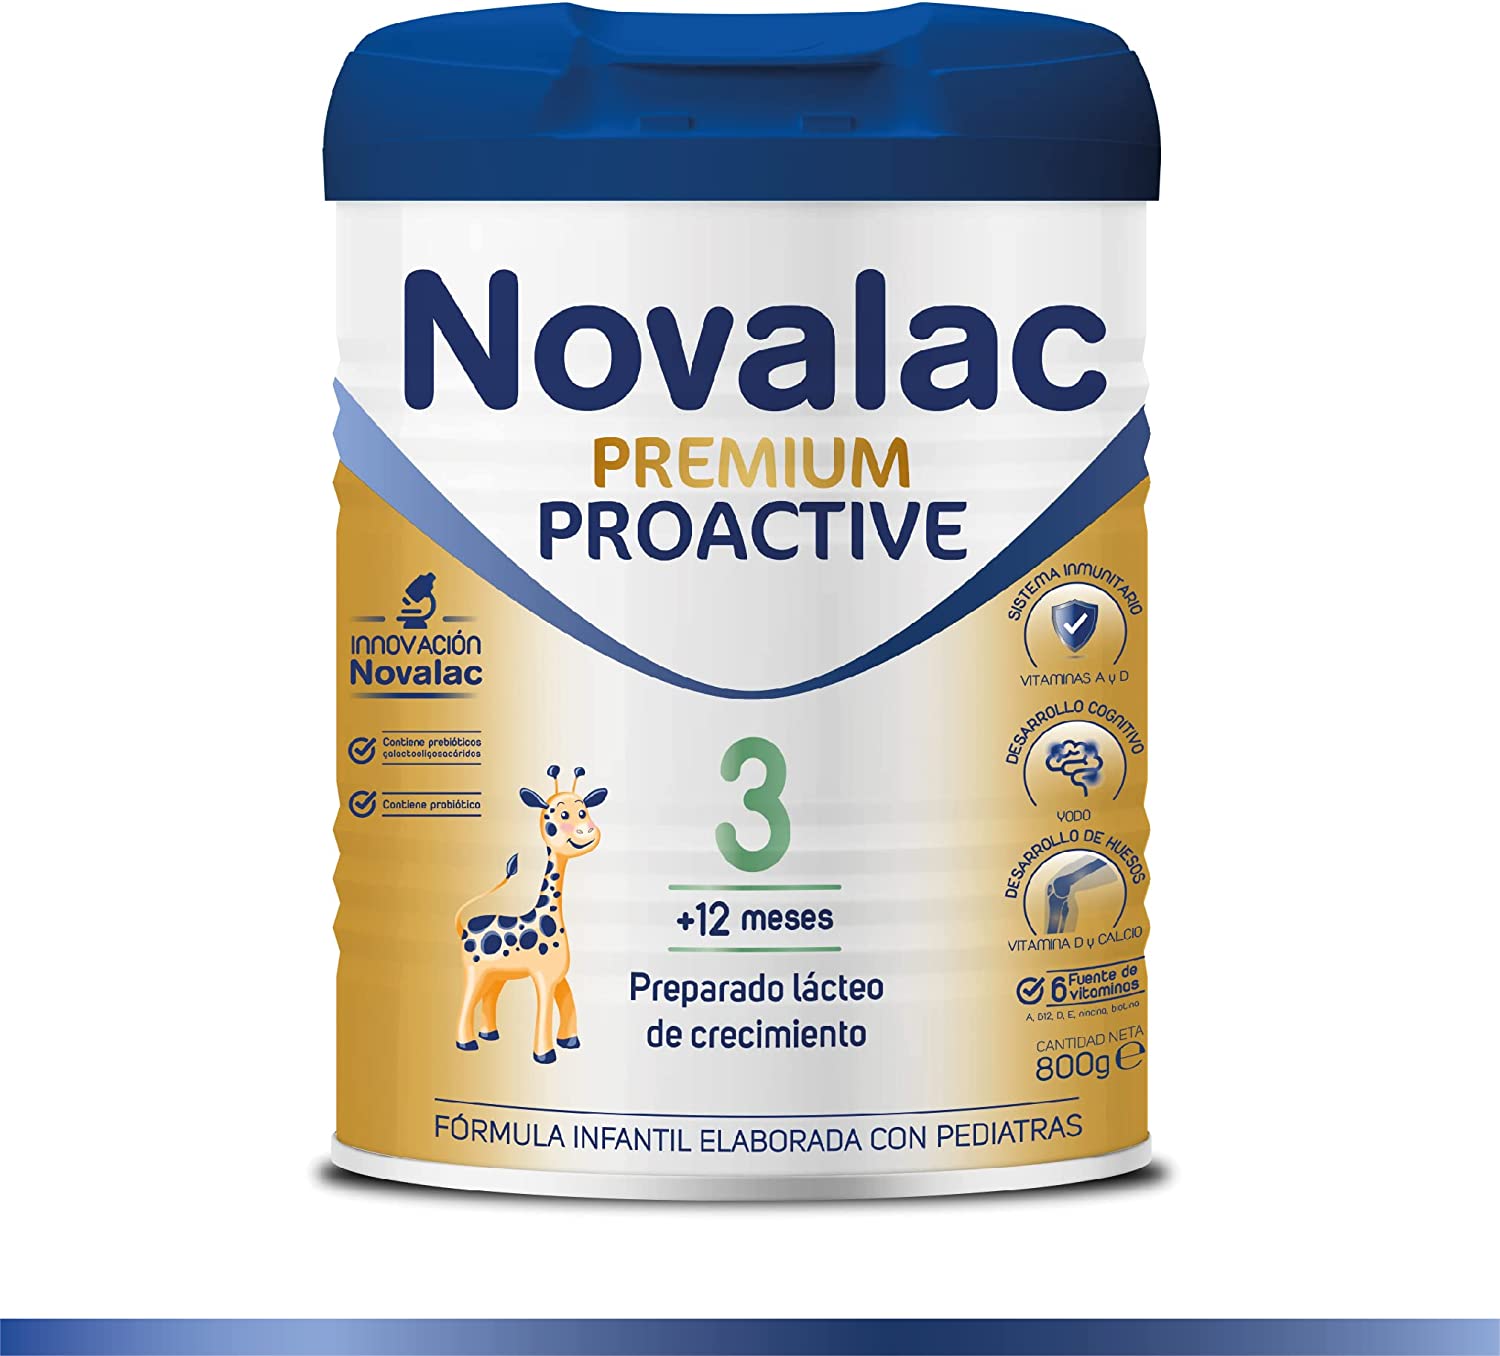 NOVALAC Proactive 3 - Ready for children aged 1 to 3 years, 1 piece, 800 g